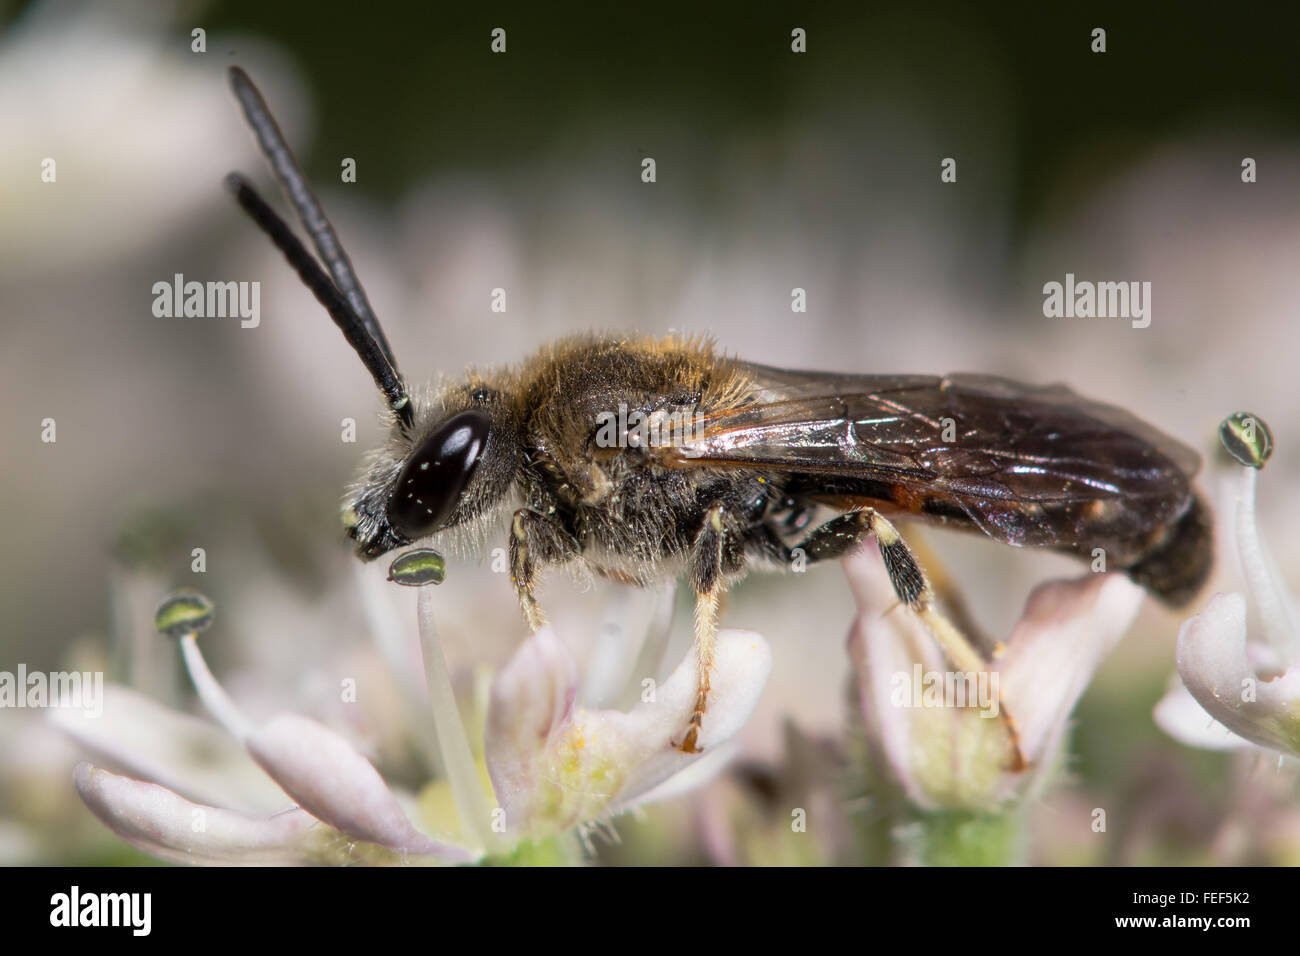 Lasioglossum calceatum solitary bee on flower. A male solitary bee in the family Halictidae, with distinctive orange bands Stock Photo